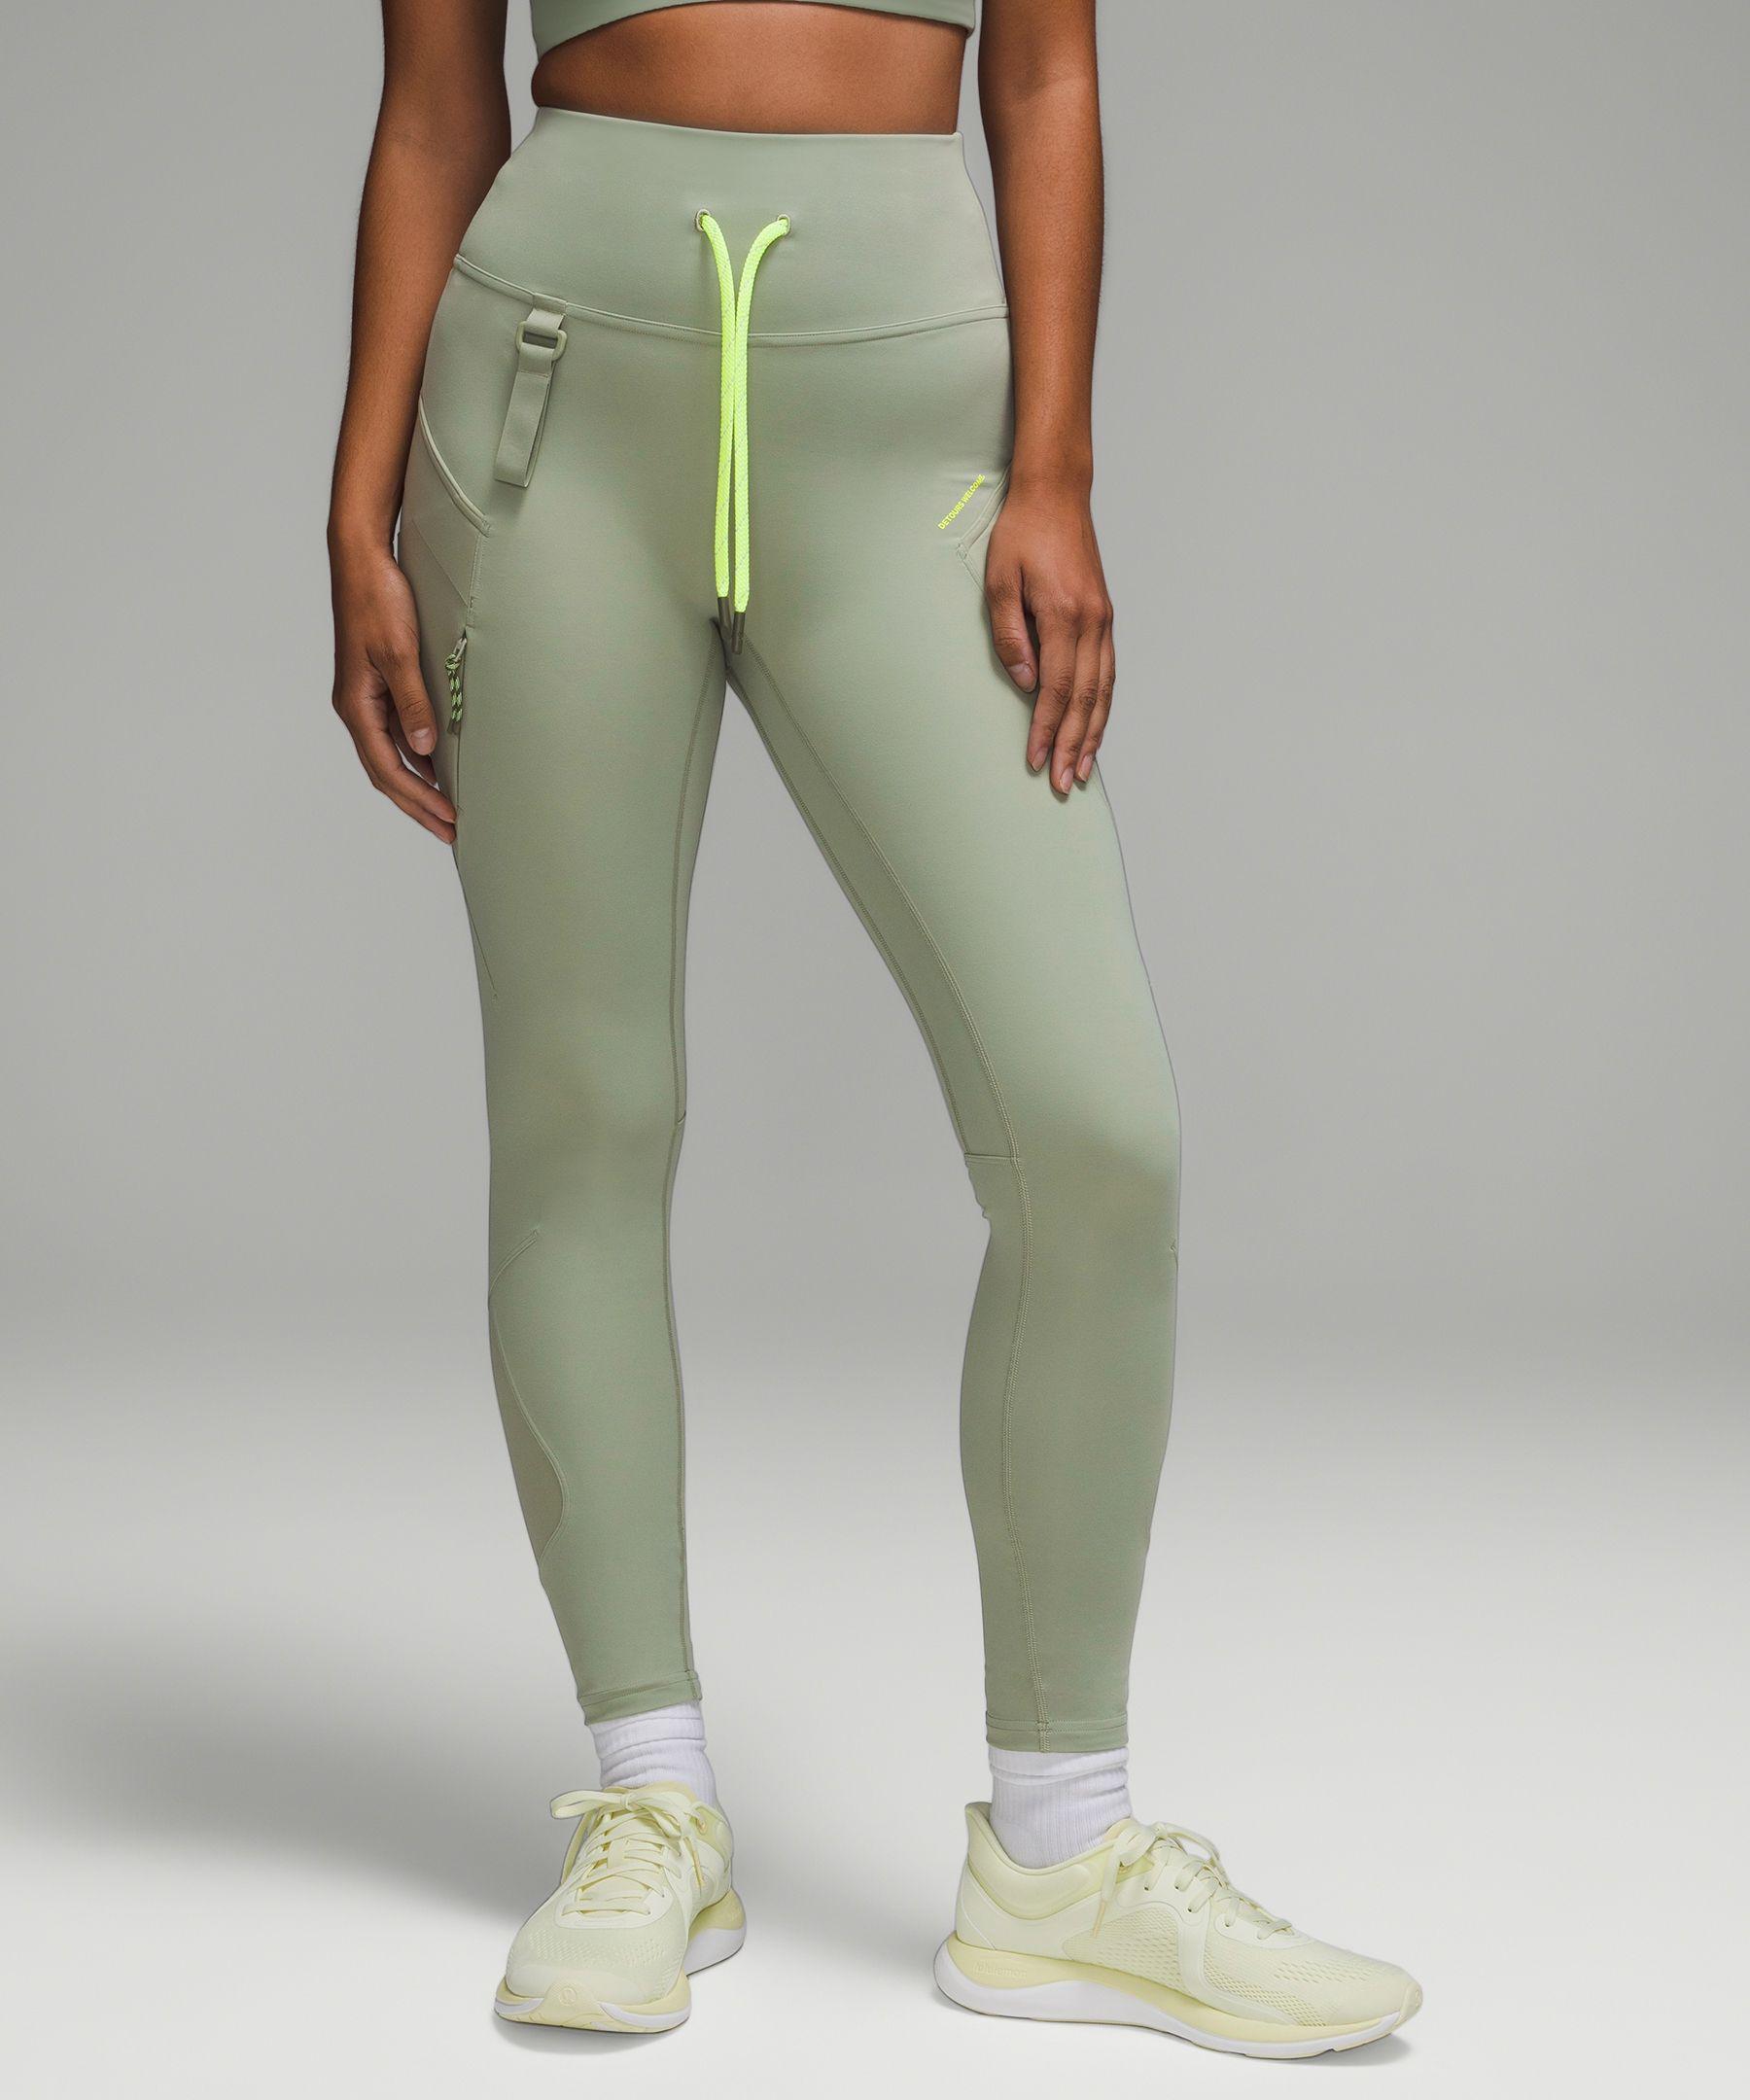 lululemon athletica Cargo Super-high-rise Hiking Tight 25 Online Only in  Green